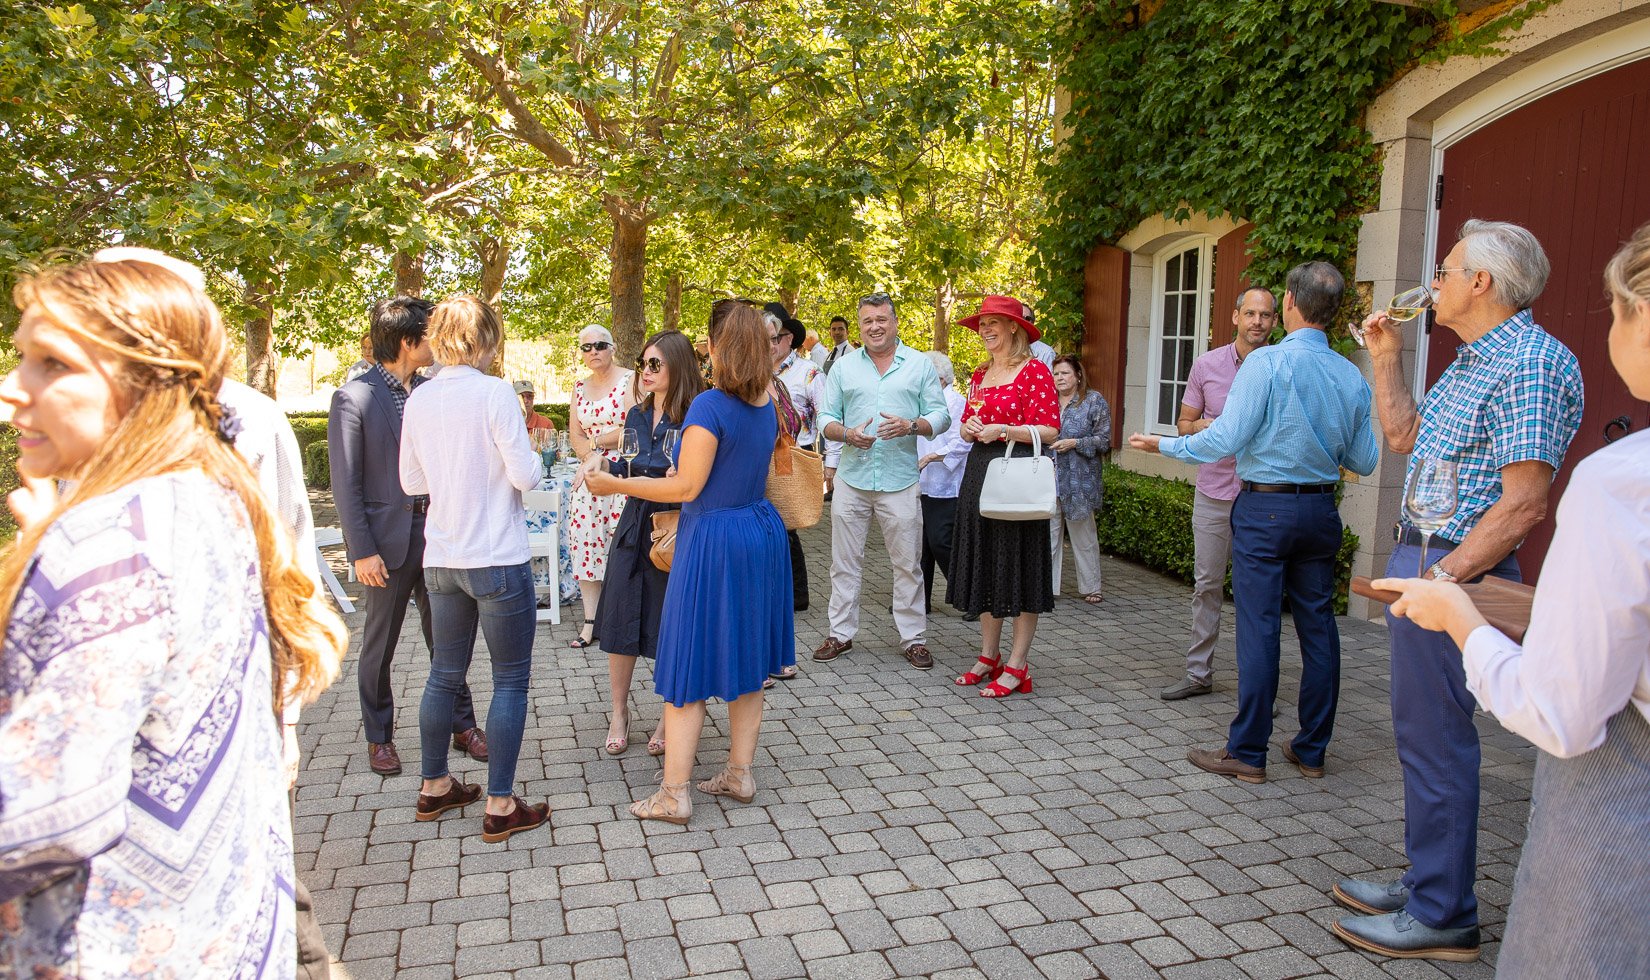 Guests socializing in the Jordan Winery courtyard. Most men are in jeans or slacks and a button down shirt. The women are in knee length dresses or nice pants.